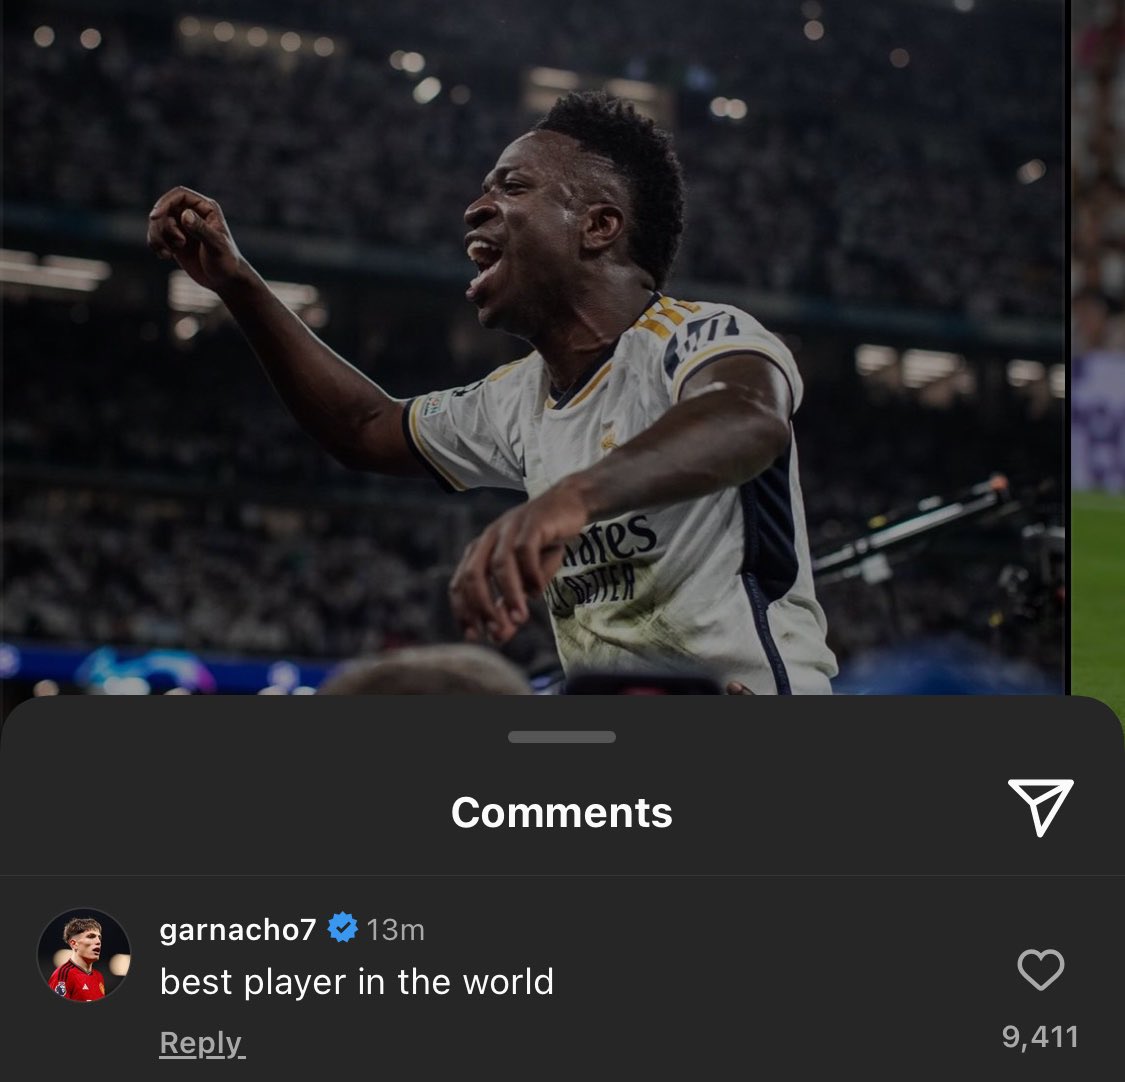 Garnacho is really getting on my nerves right now. It's crazy seeing him going around commenting on Real Madrid's posts, especially after we lost 4-0 just a few days ago. Ask yourself why other players from other teams aren't doing the same. The disrespect from these players at…